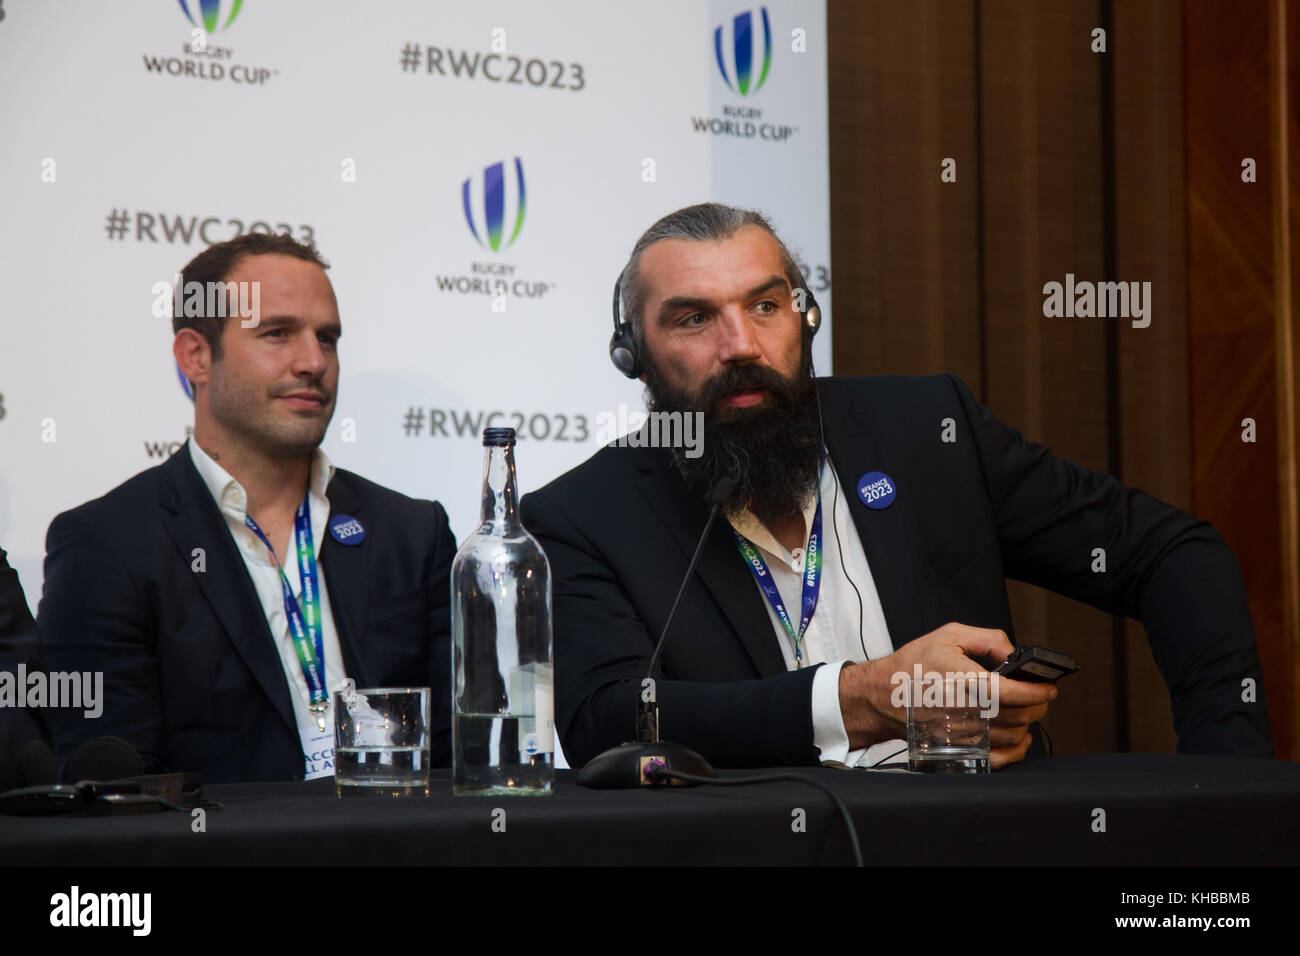 London, UK. 15th November 2017. Ex-french rugby player, Sebastien Chabal with the French delegation during the press conference where France win the bid to host the next Rugby World Cup in 2023 in an announcement made in London. Ireland, South Africa and France put their bids forward to be host candidates for the tournament. © Elsie Kibue / Alamy Live News Stock Photo